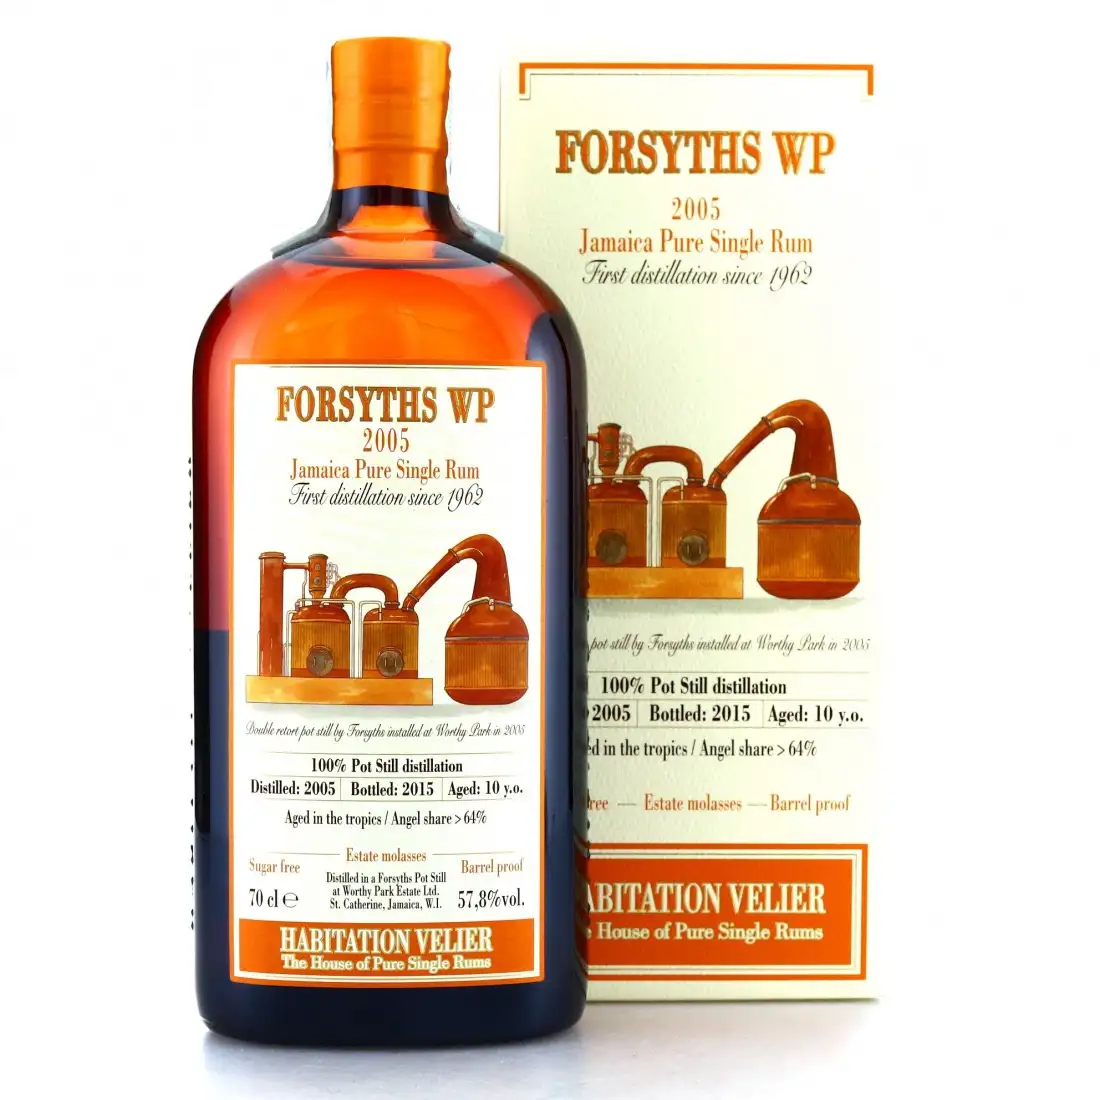 Image of the front of the bottle of the rum Forsyths WP